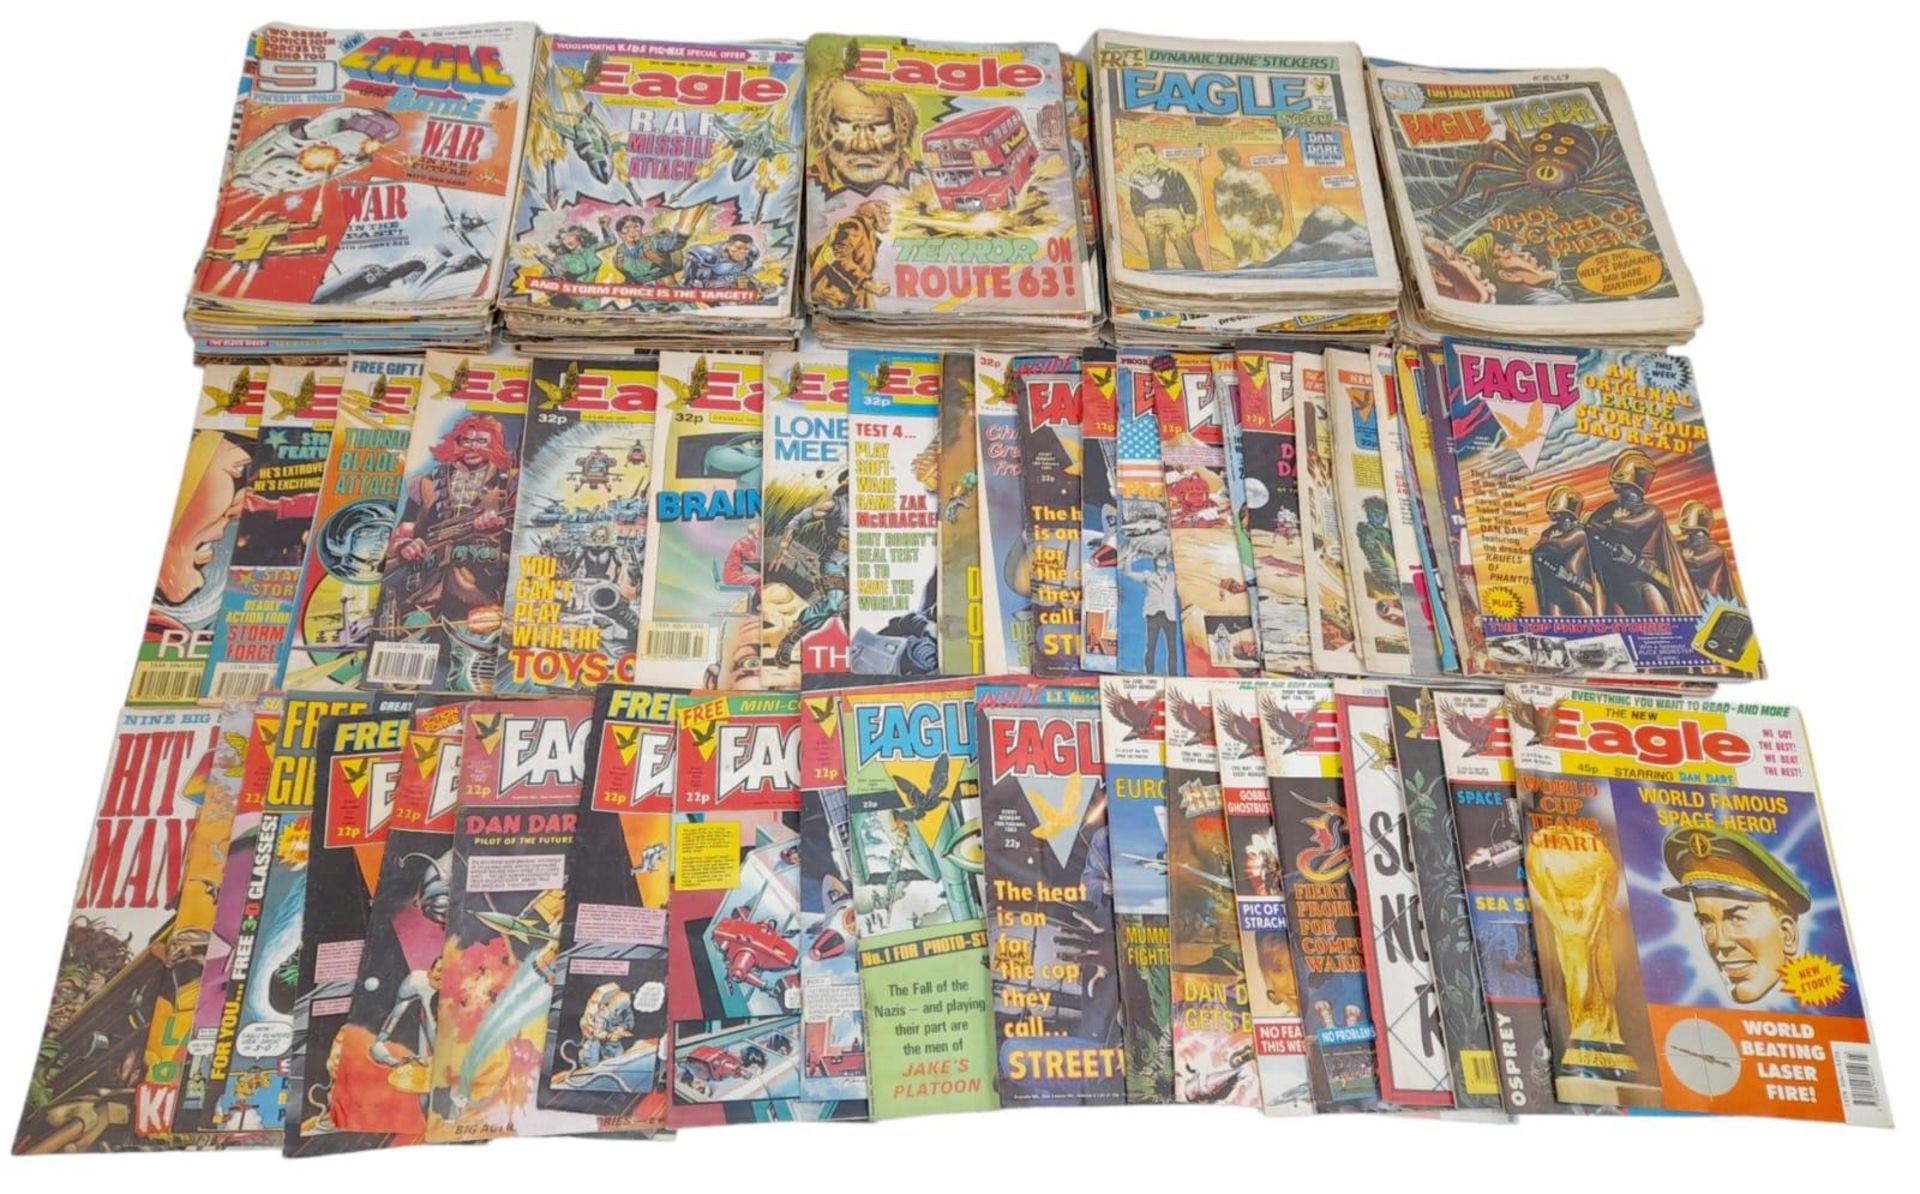 A Collection of Over 100 Vintage Eagle Comics.